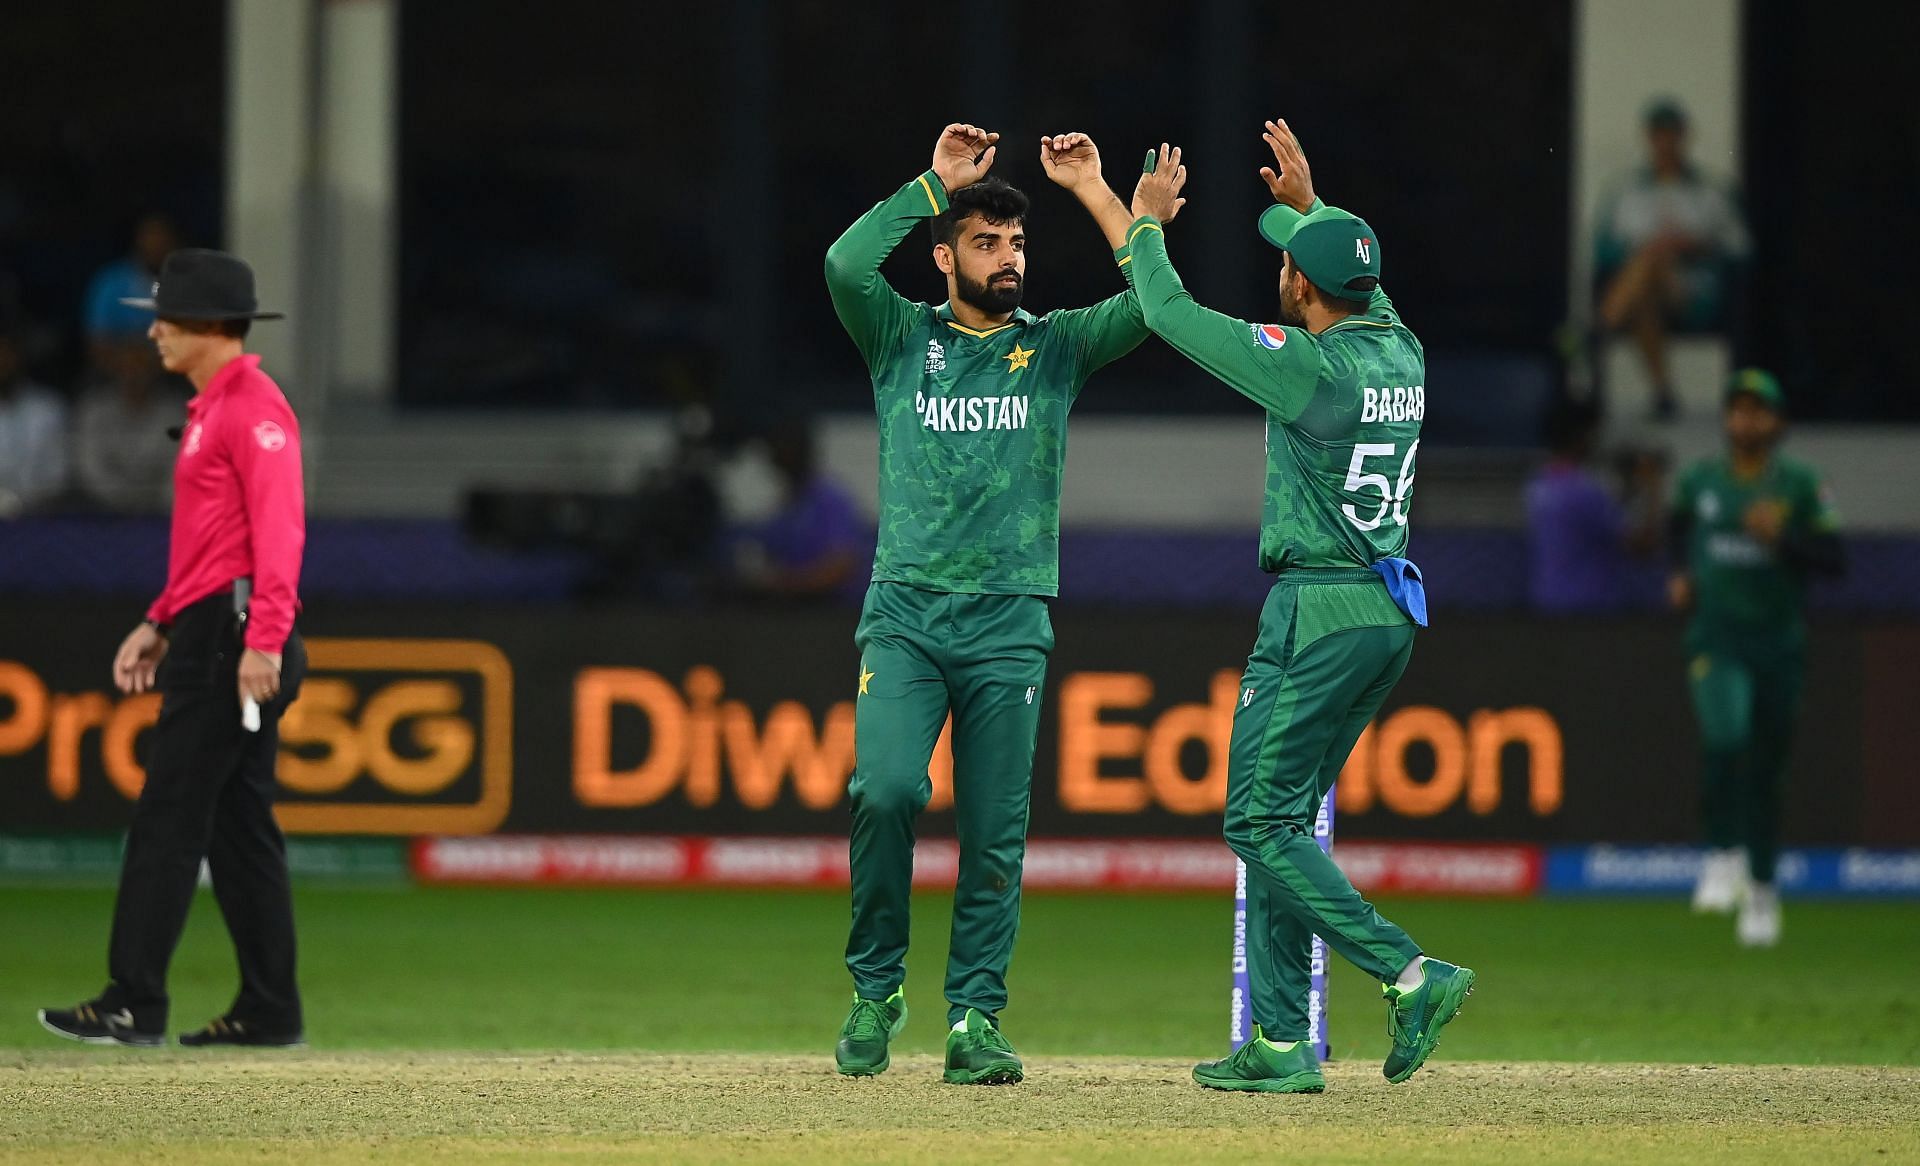 Pakistan were comprehensive winners in the first T20I.